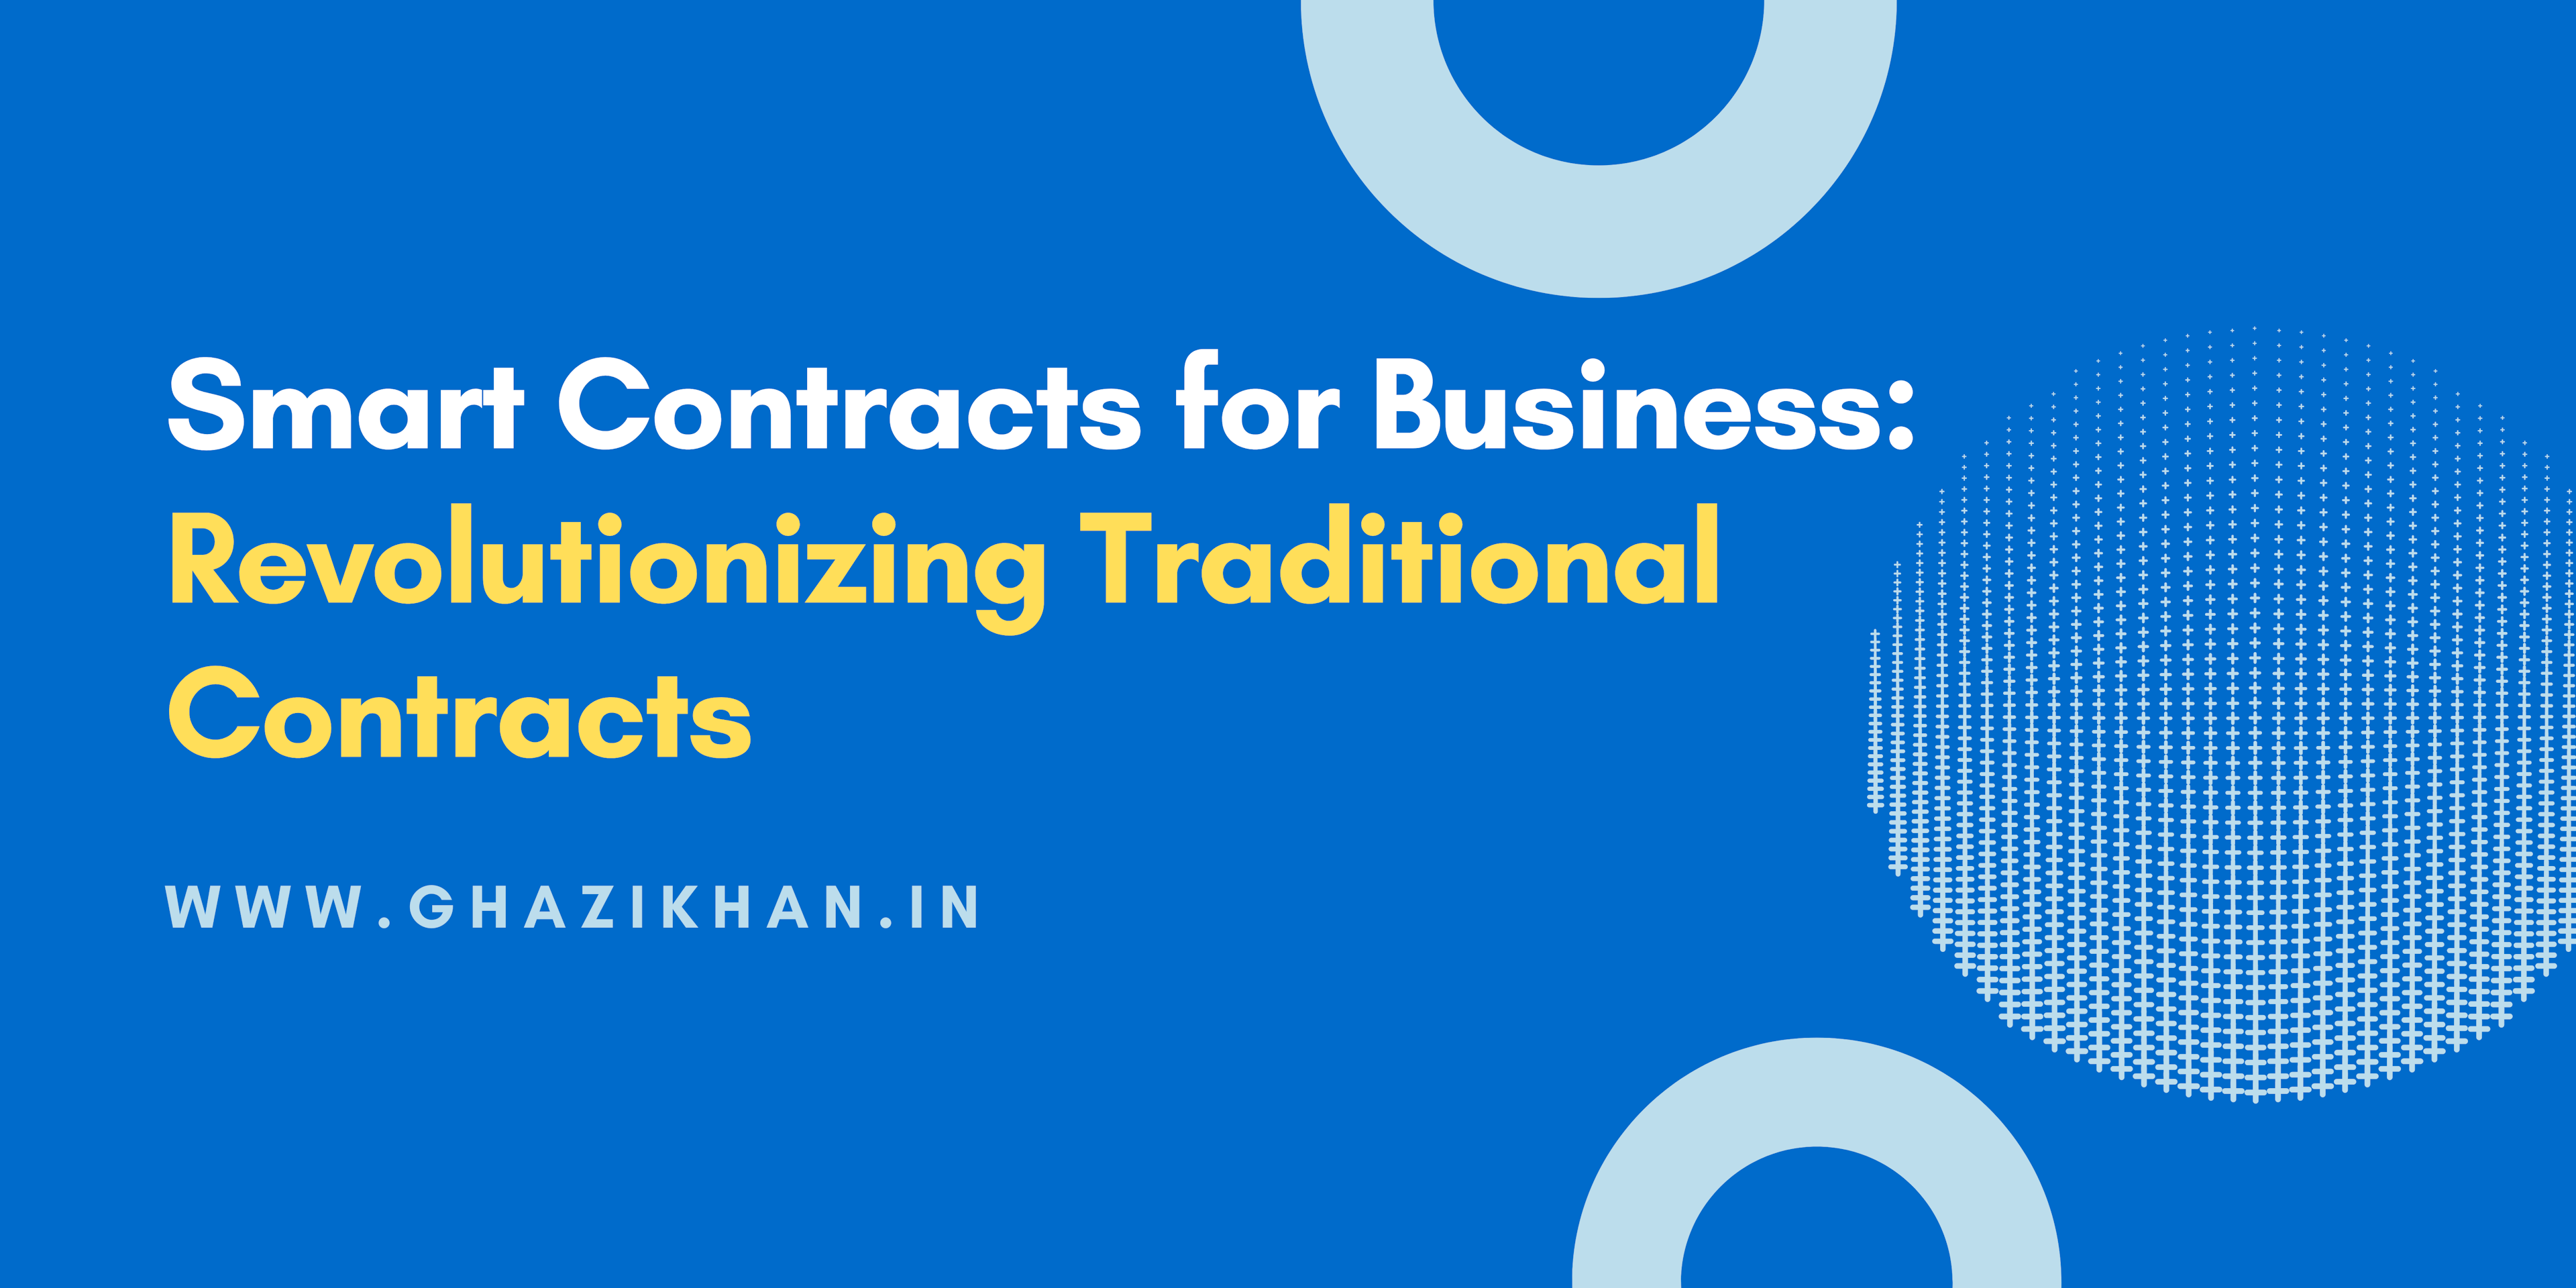 Smart Contracts for Business: Revolutionizing Traditional Contracts